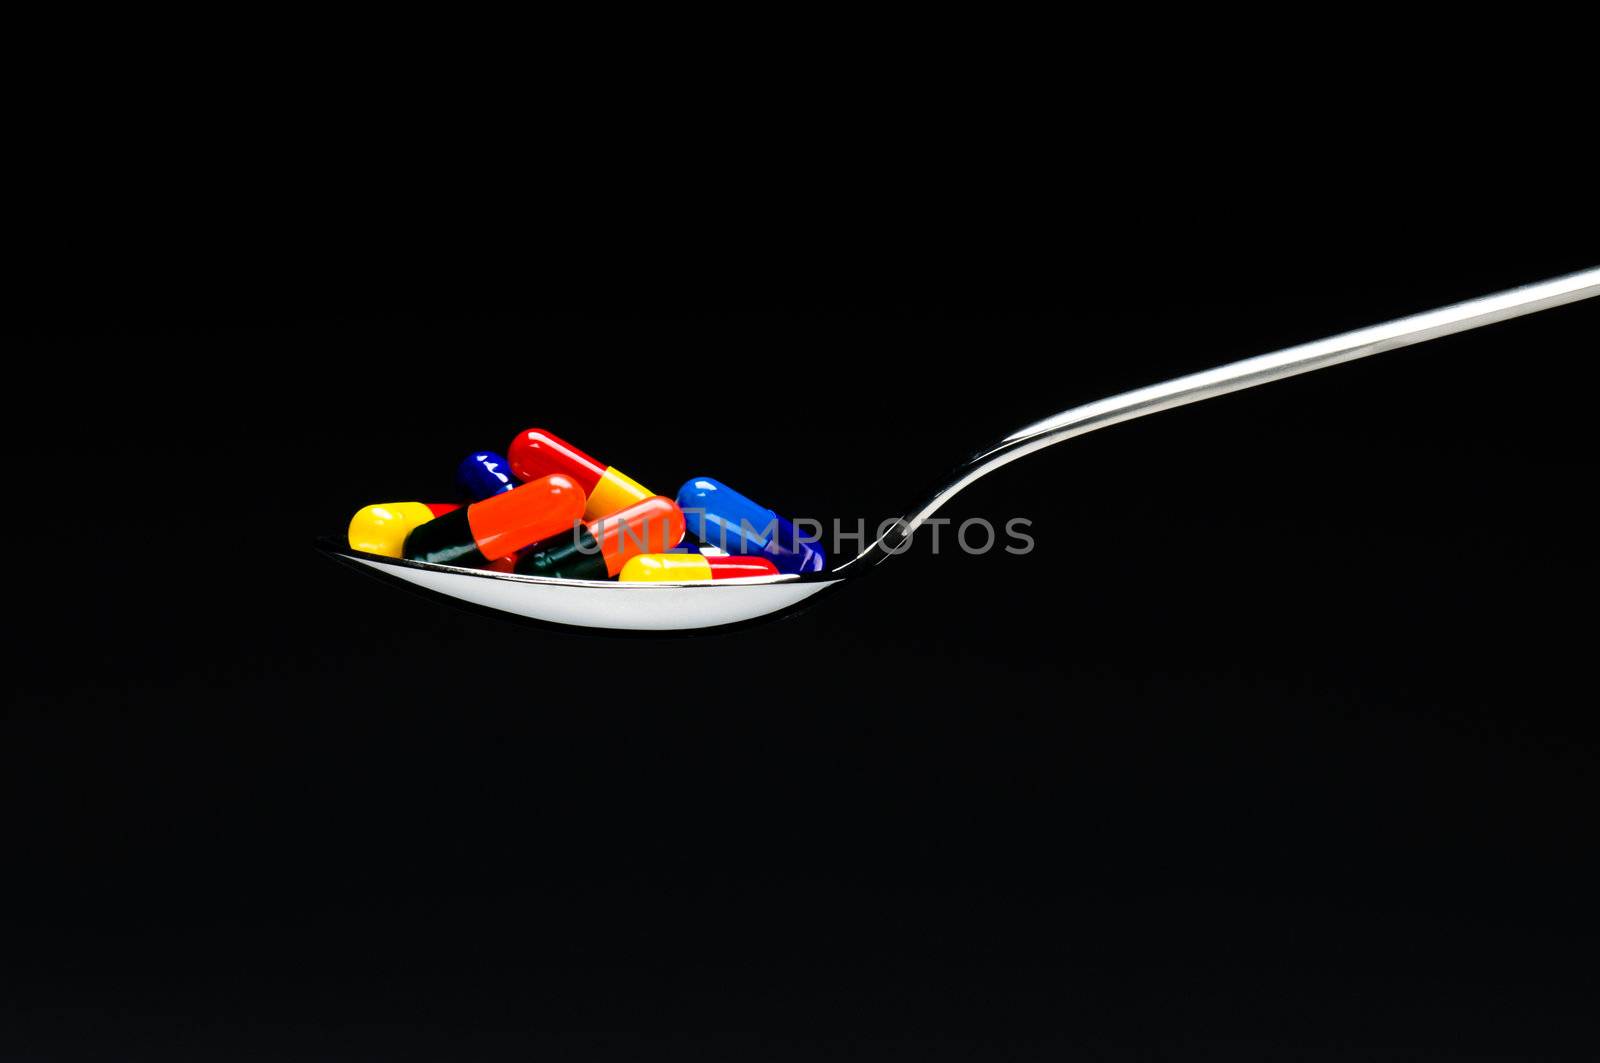 One spoon of medication in front of a black background